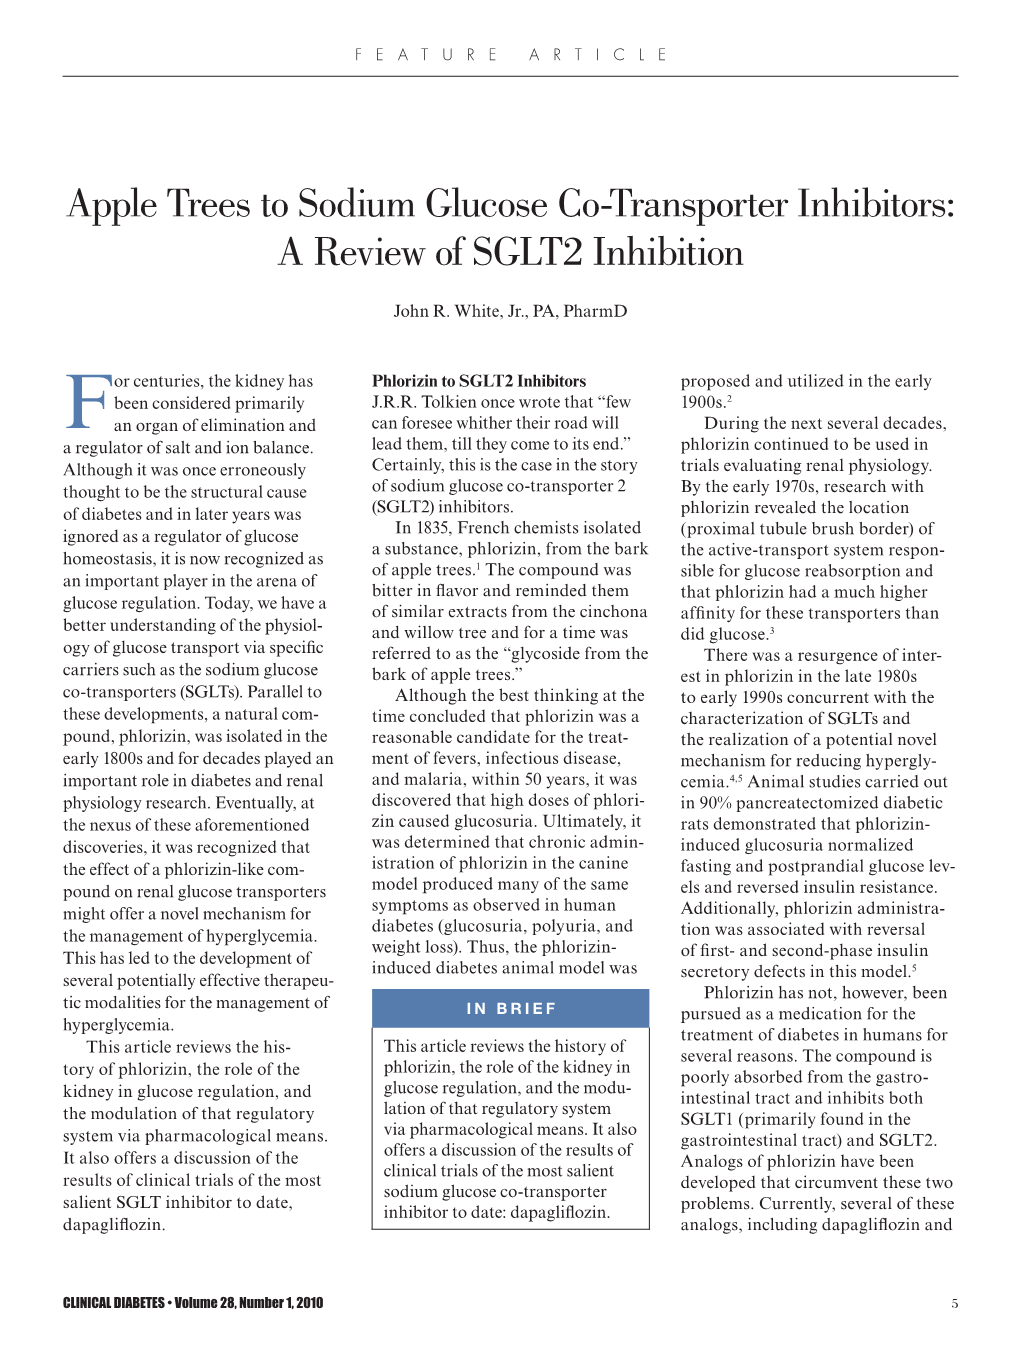 Apple Trees to Sodium Glucose Co-Transporter Inhibitors: a Review of SGLT2 Inhibition